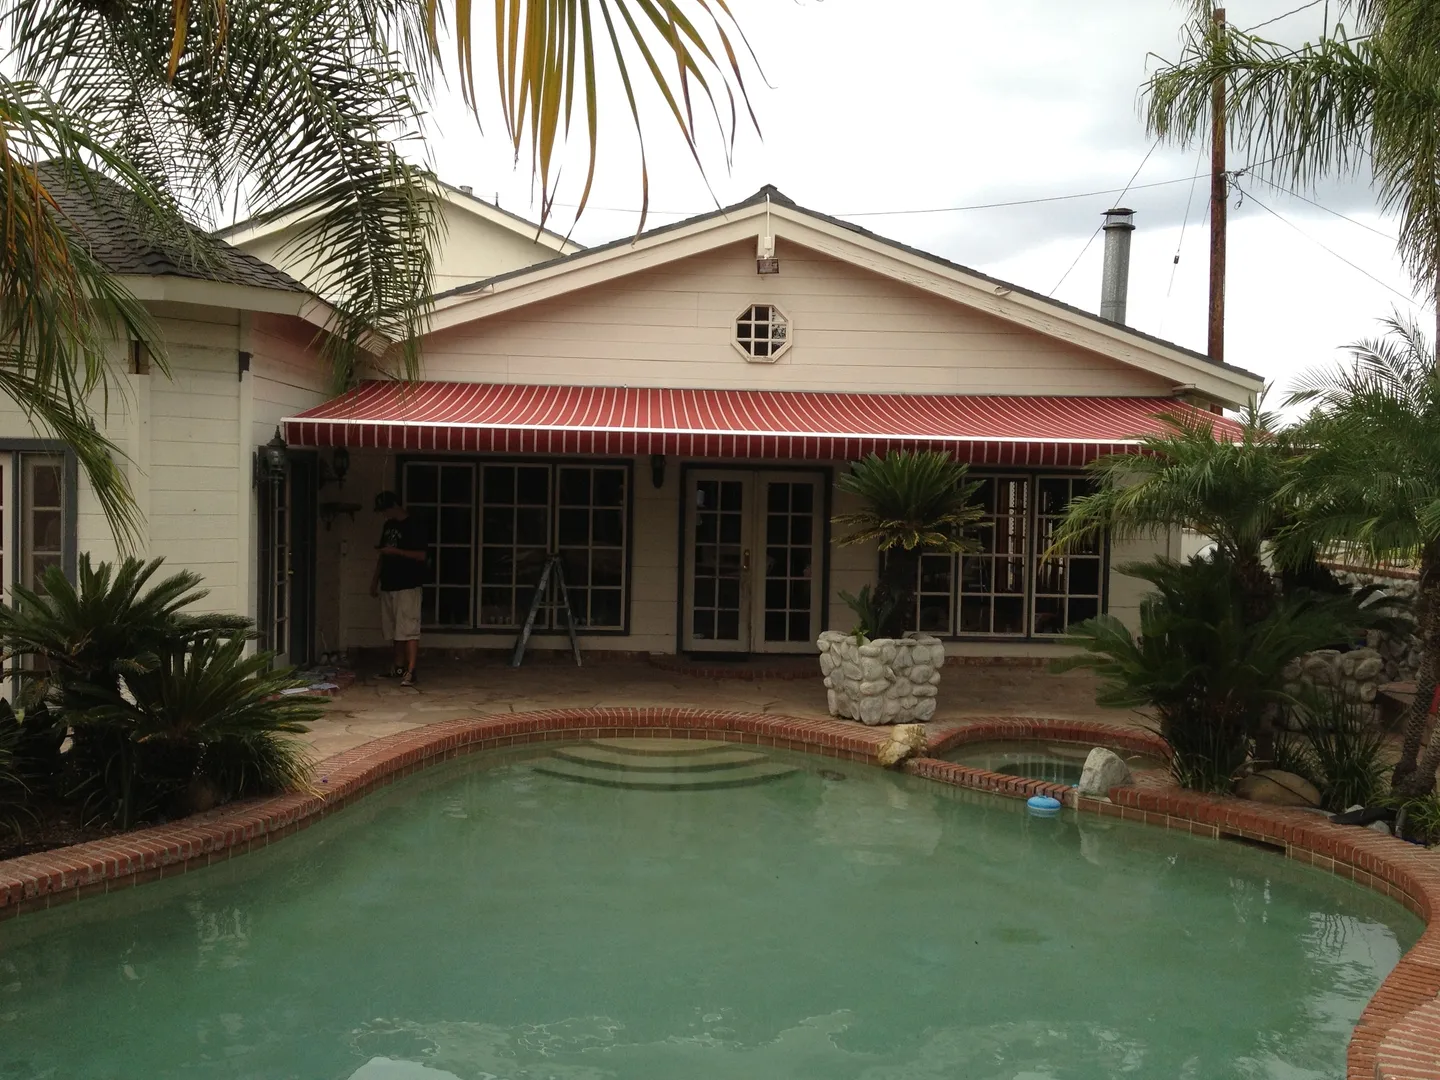 A pool with a red awning over it